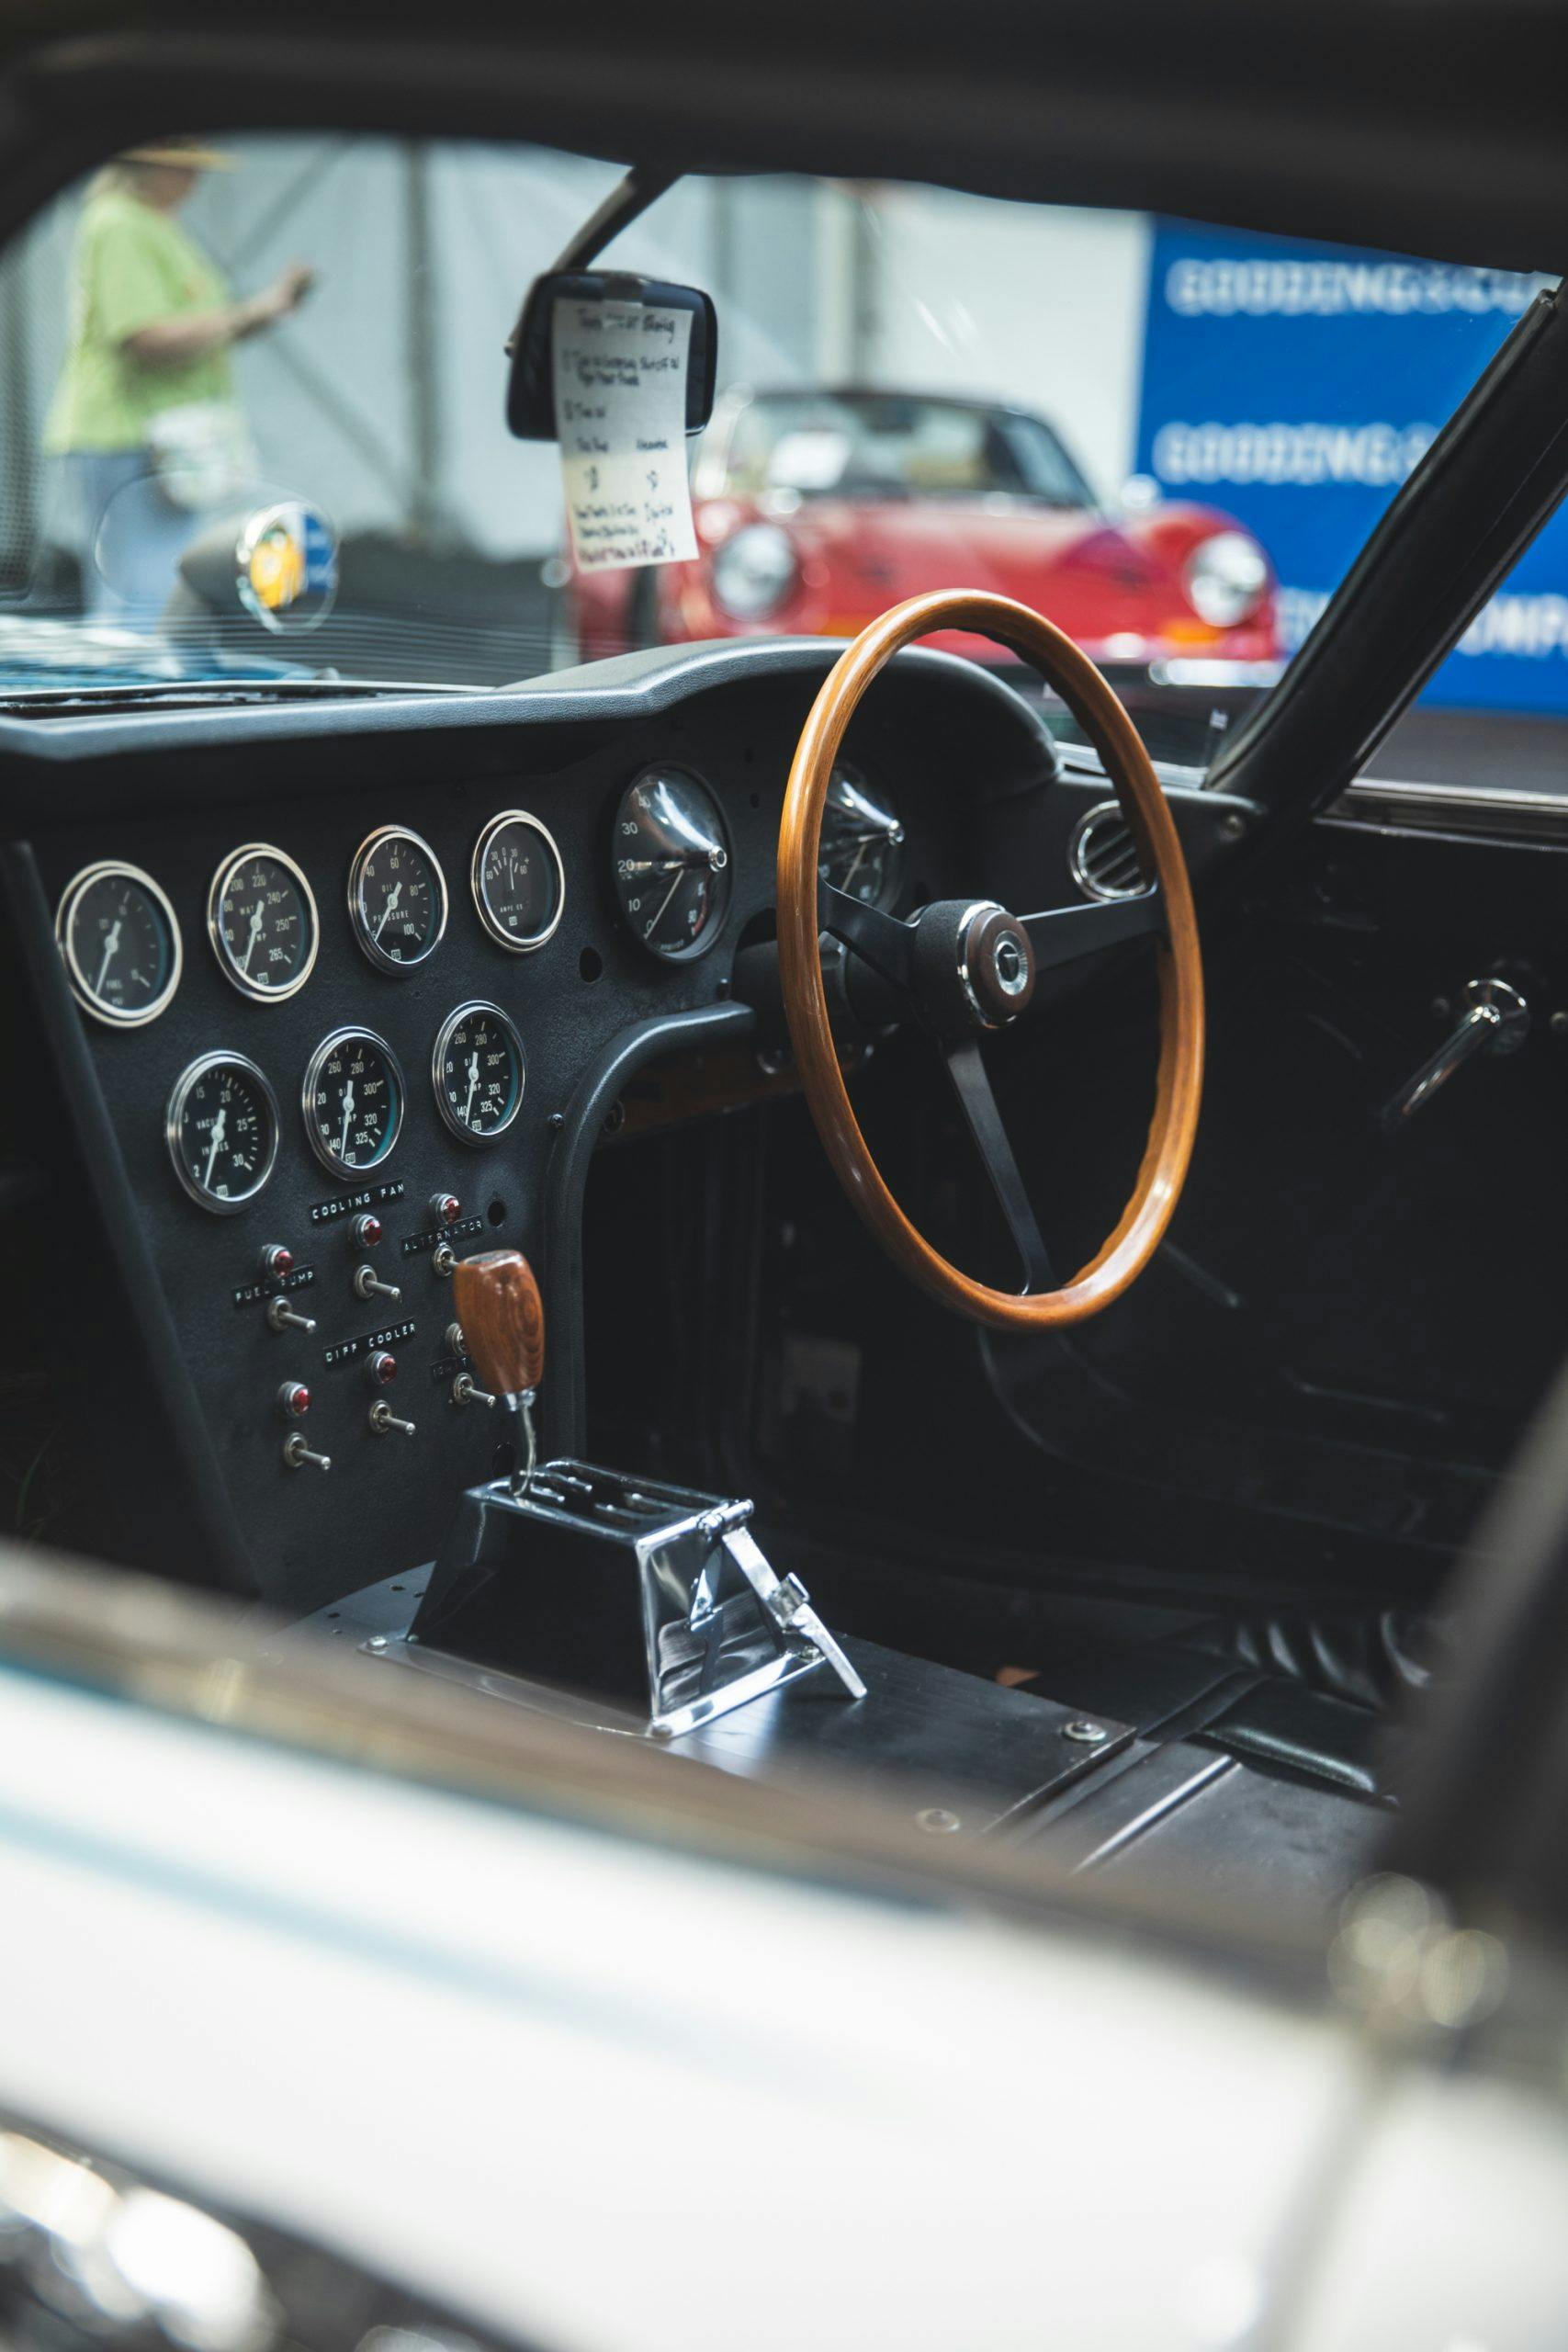 Toyota-Shelby-2000GT auction interior